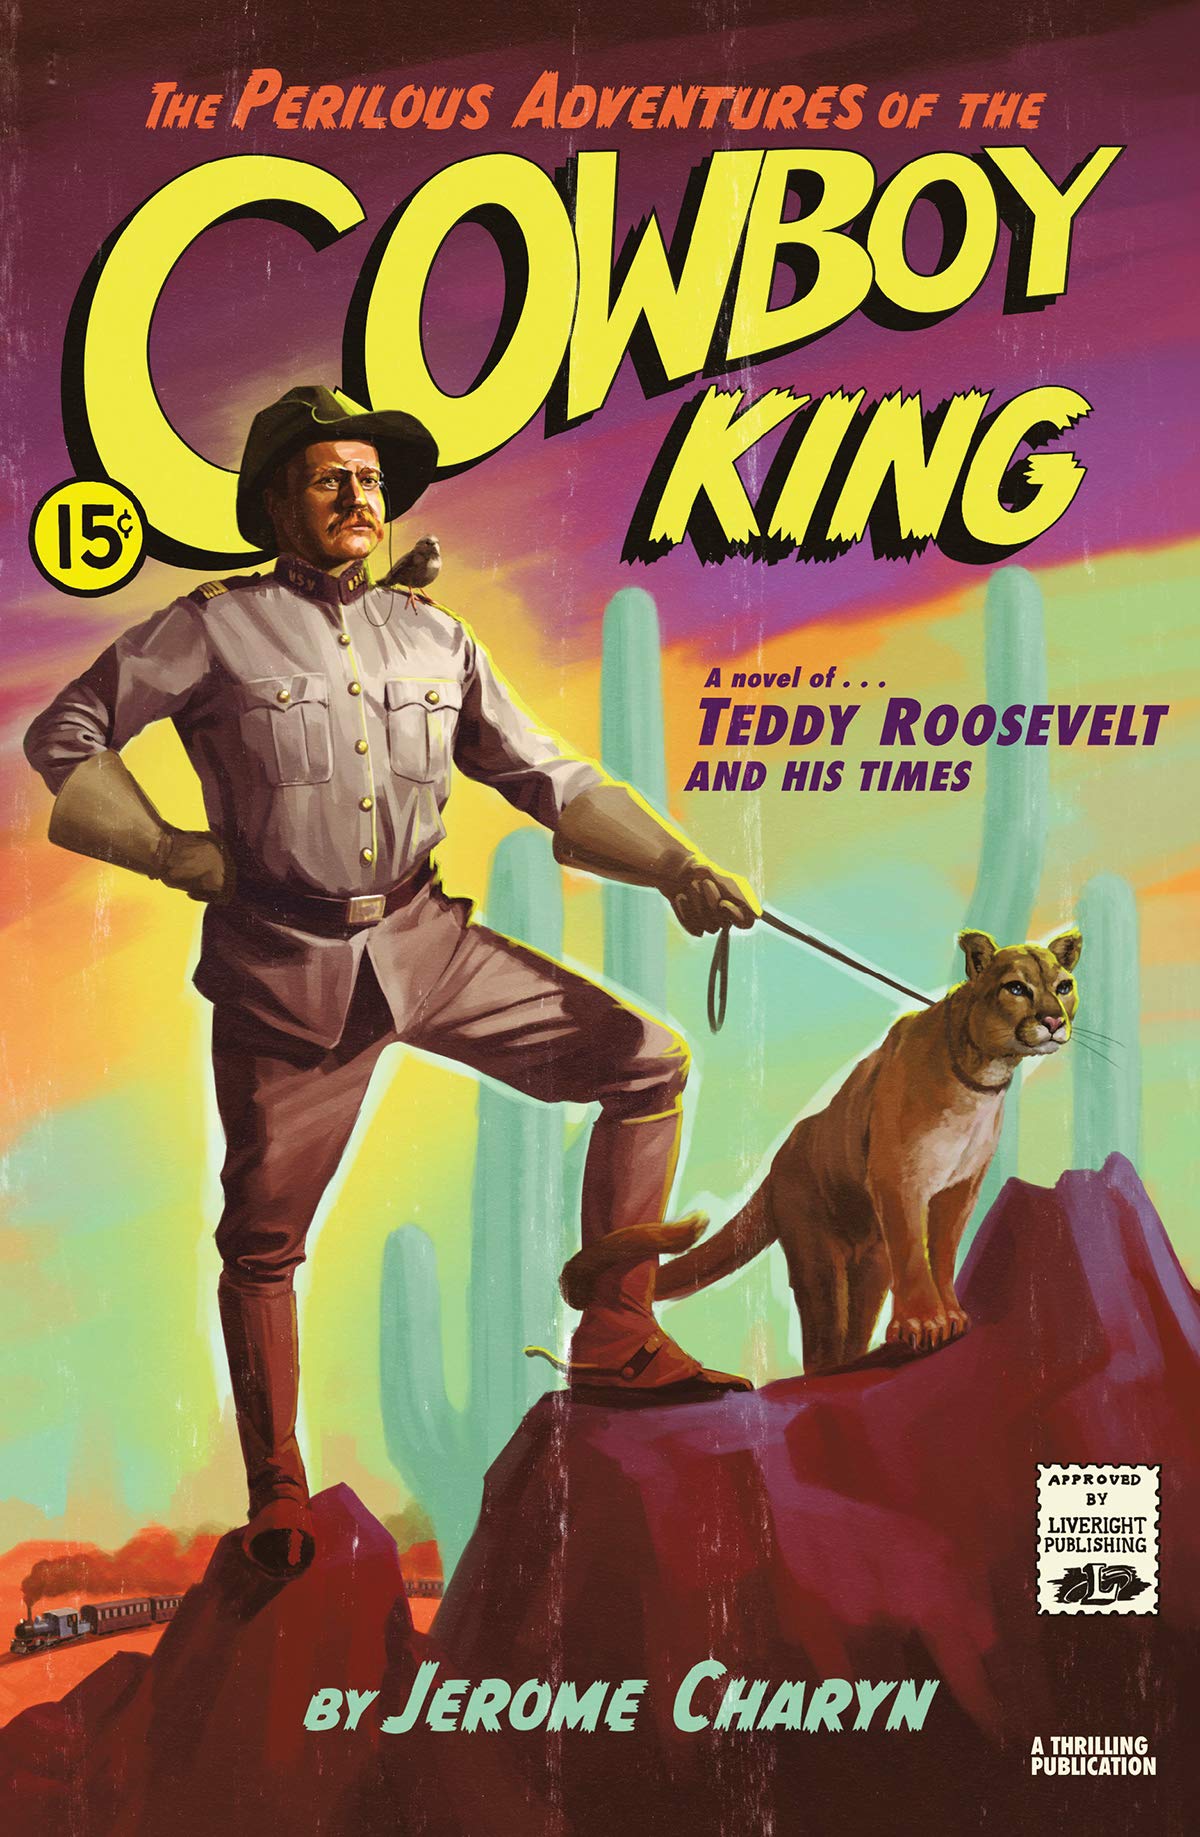 Image for "The Perilous Adventures of the Cowboy King"